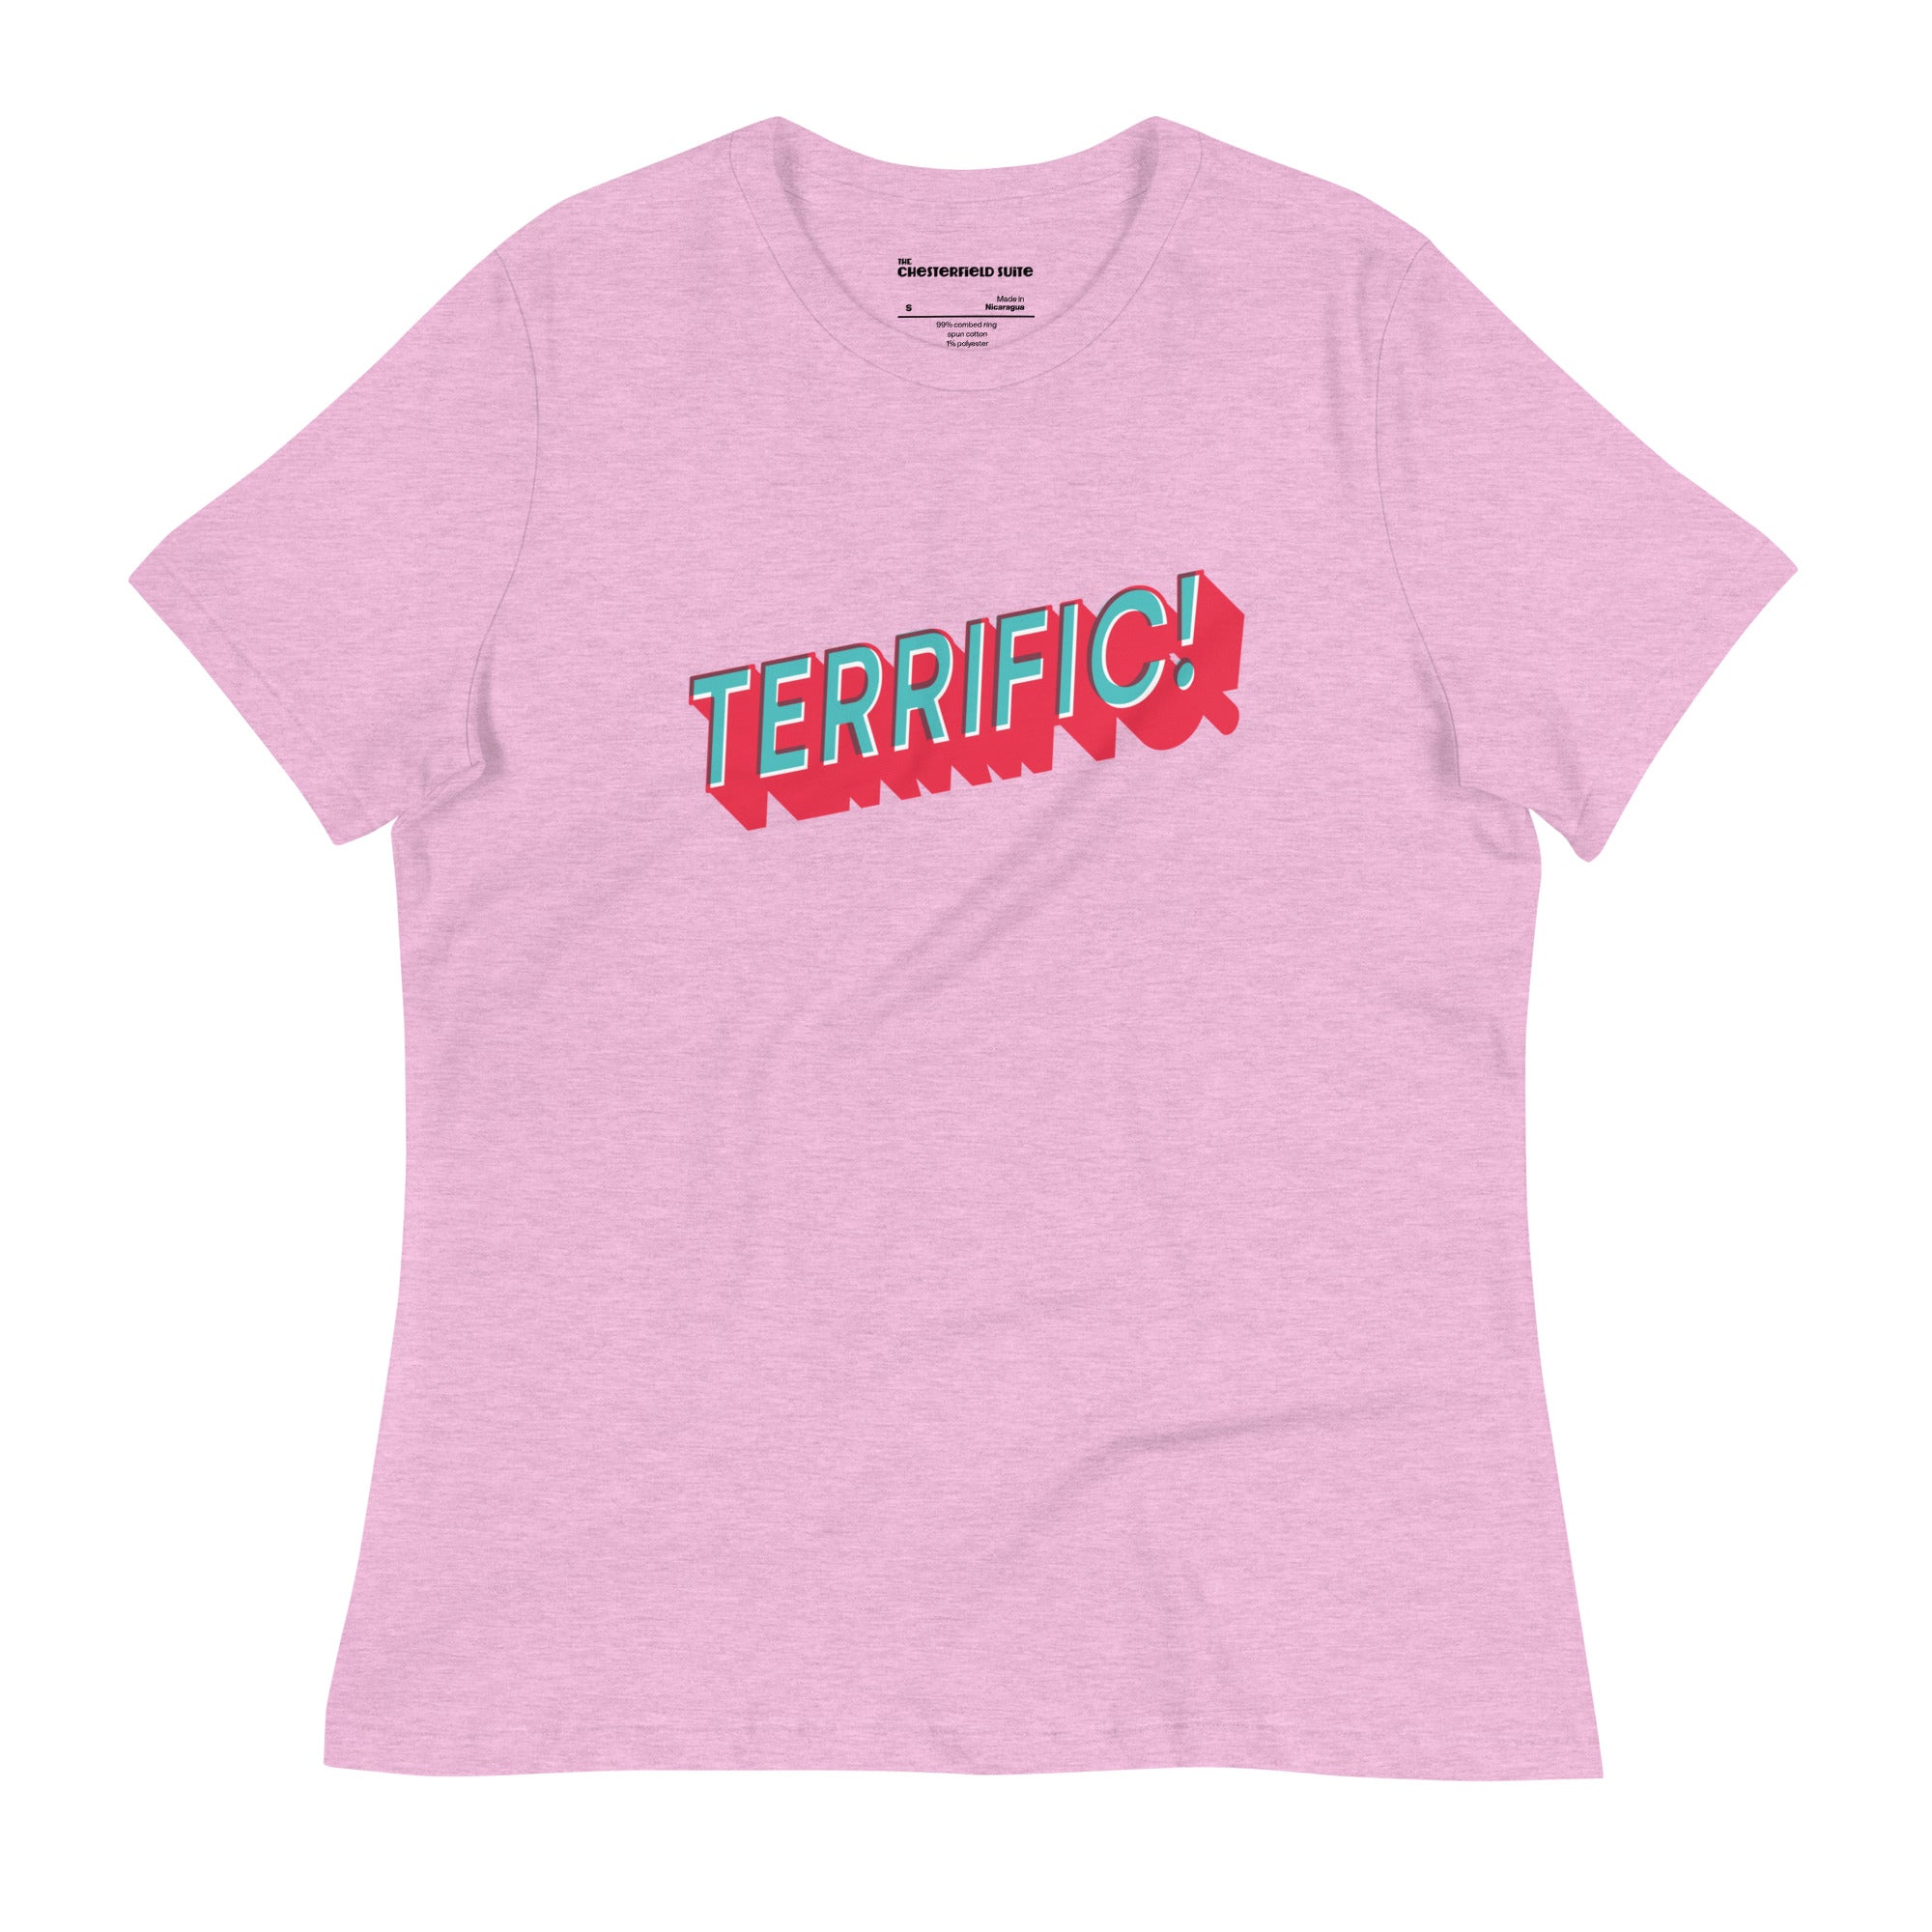 the word terrific in turquoise and red on a pink women's t-shirt